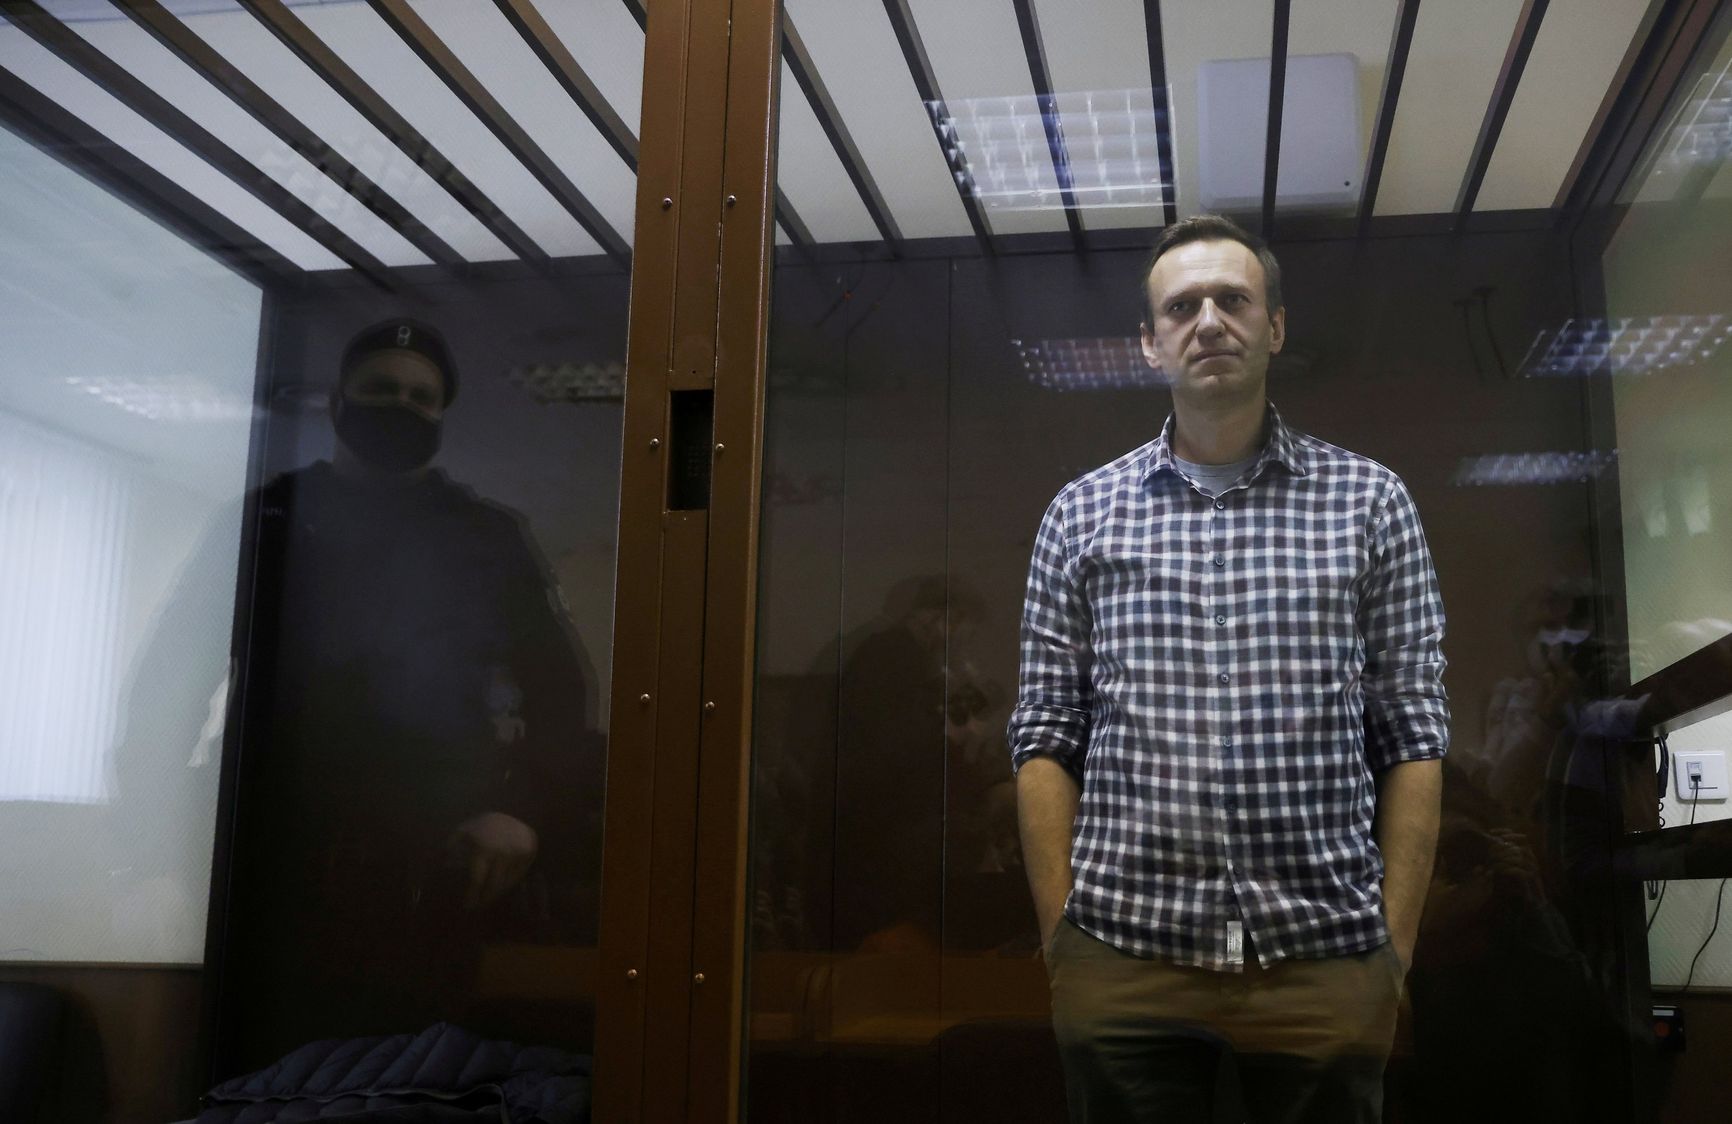 Opposition leader Alexey Navalny is held in prison since January 